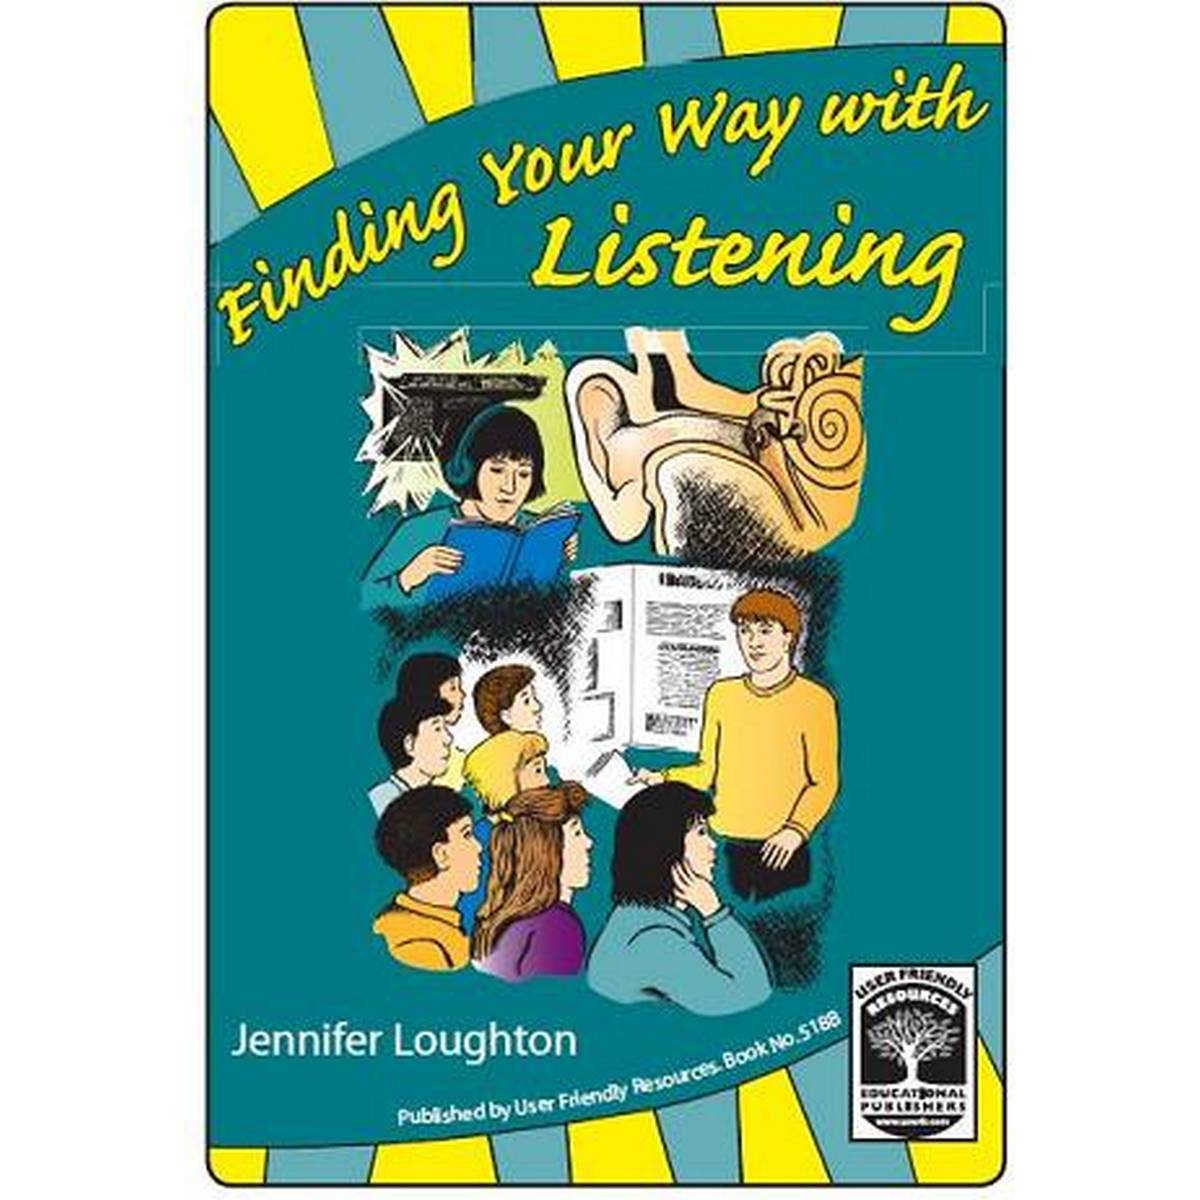 Finding Your Way with Listening